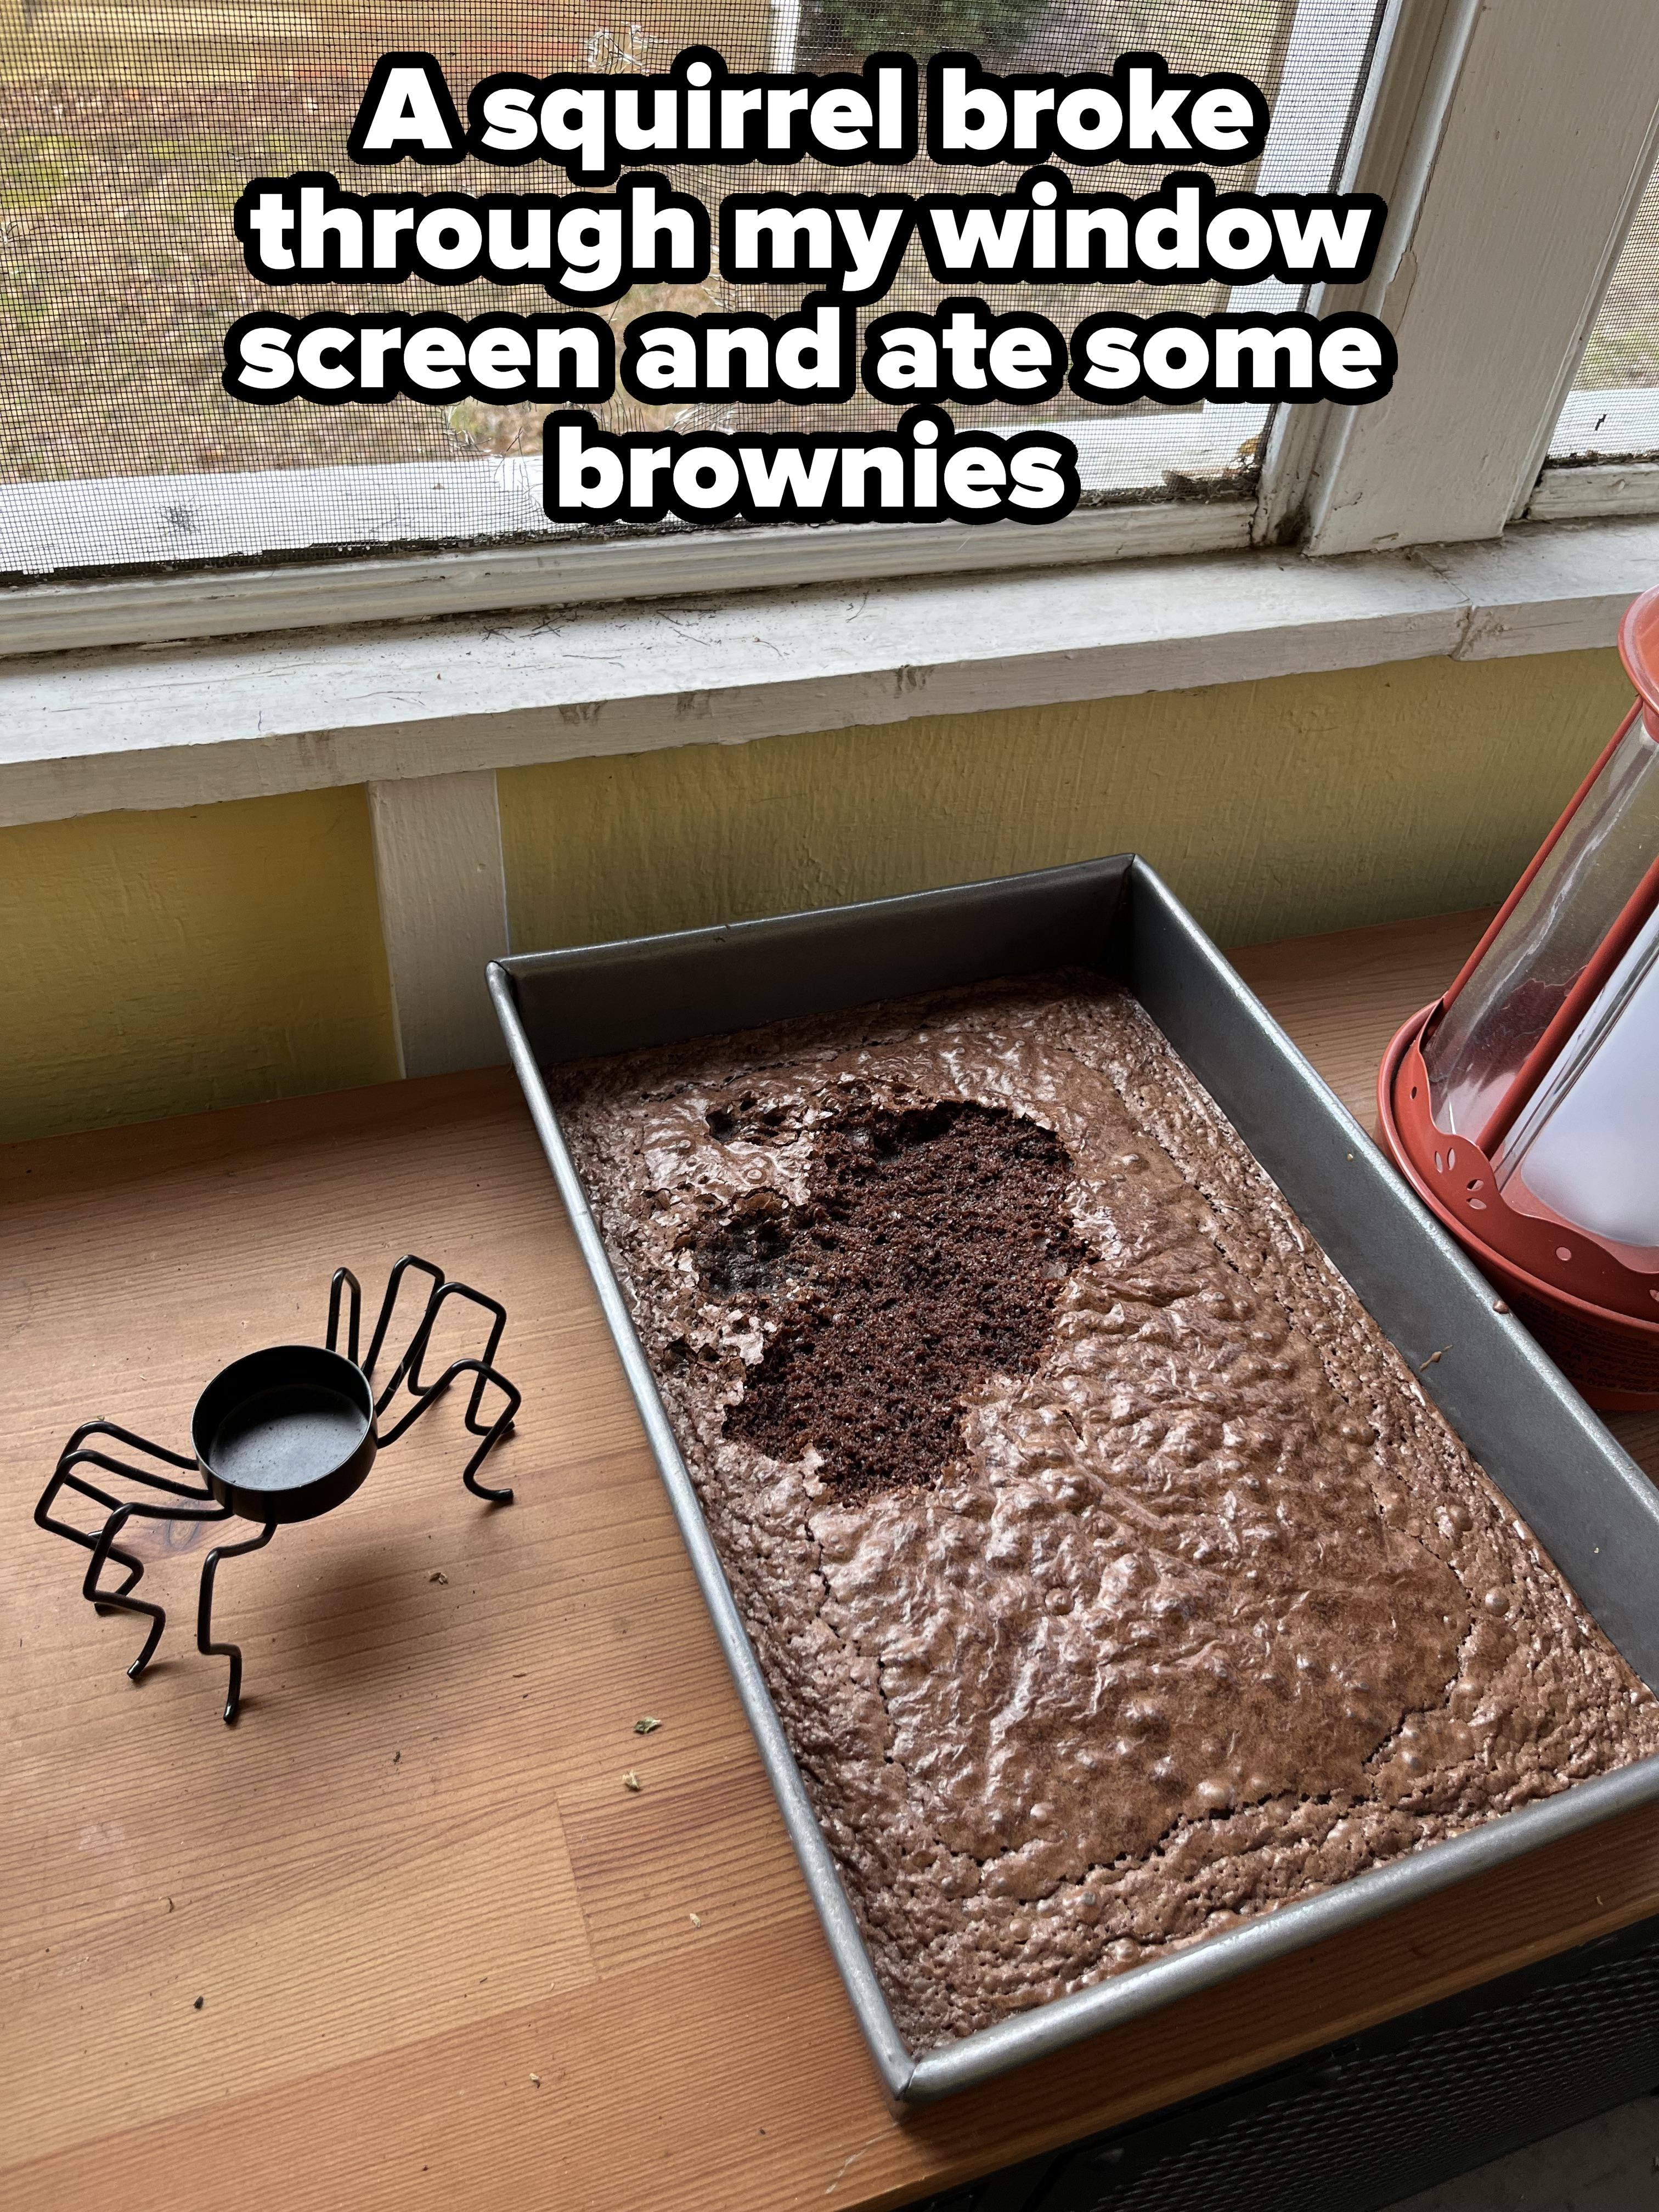 A pan of baked brownies with a missing section and a small, novelty spider decoration next to it on a windowsill